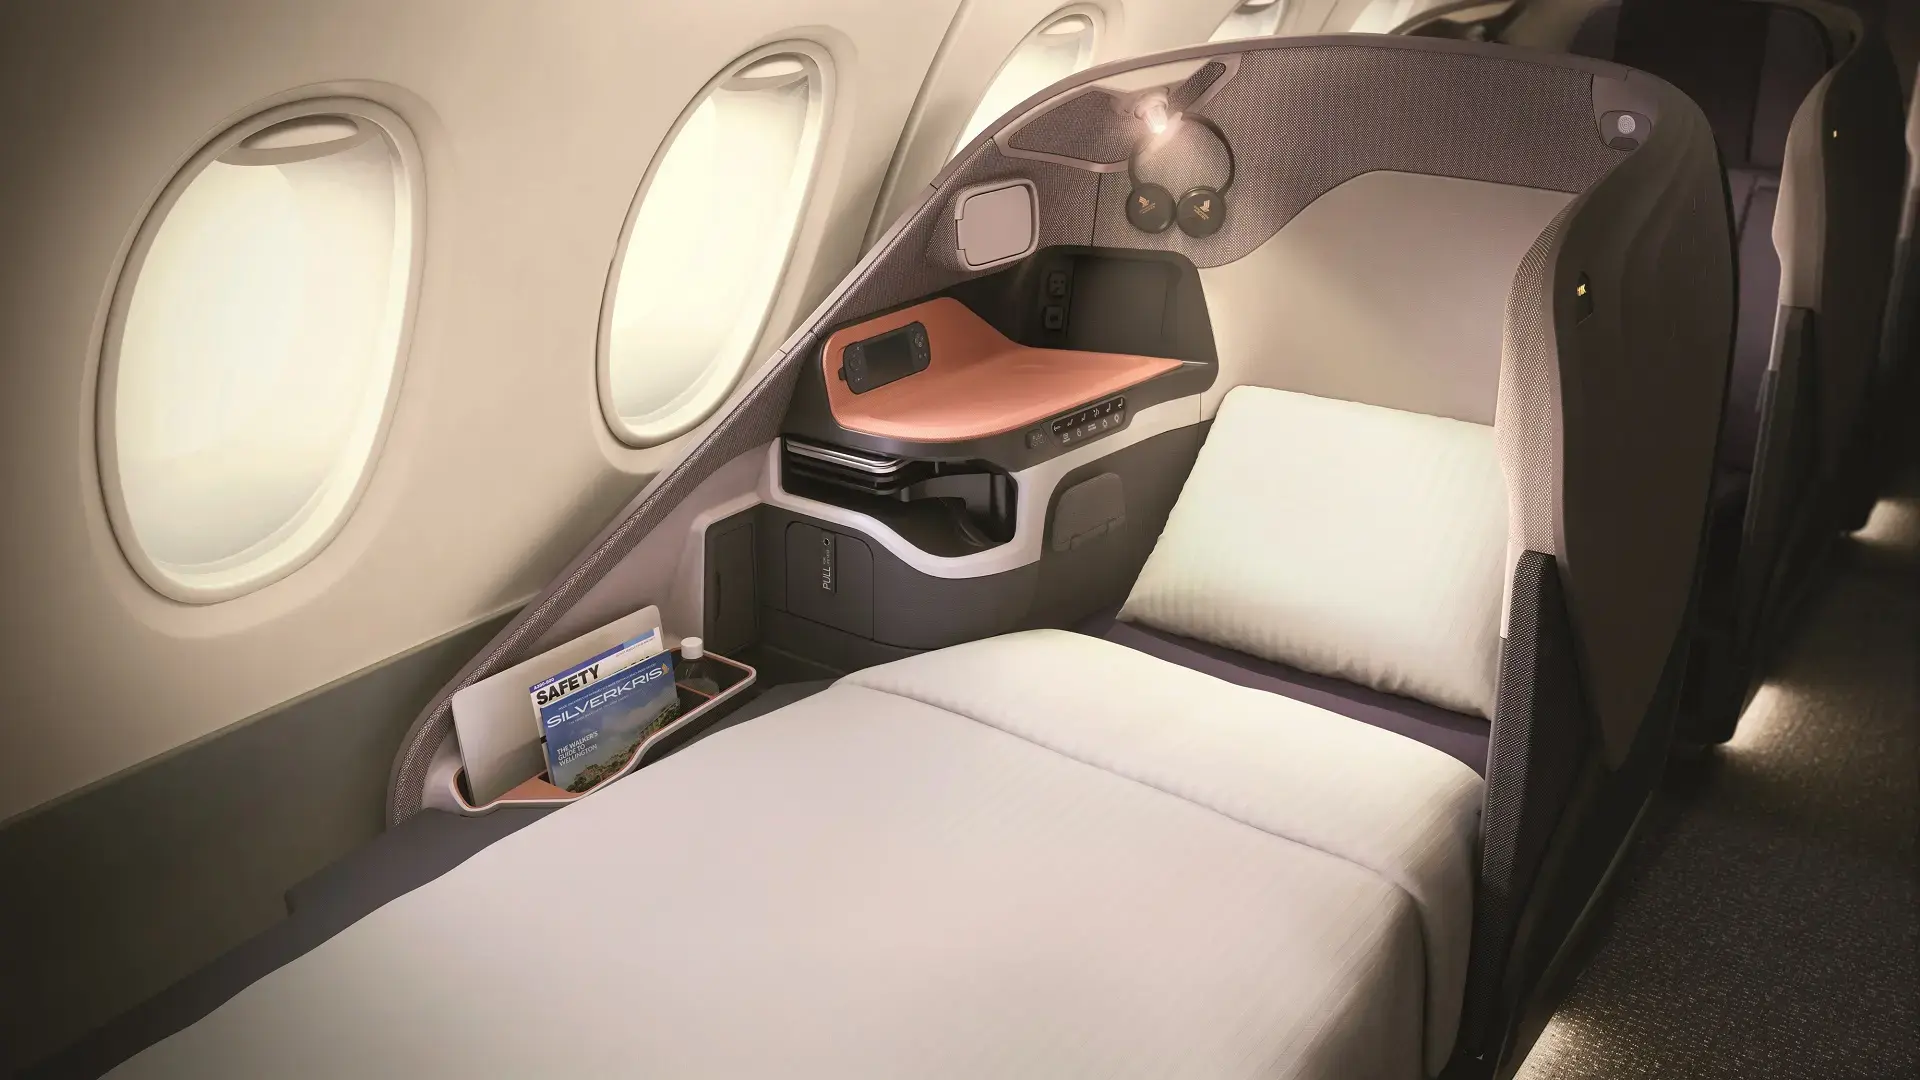 Singapore Airlines' lie flat bed in business class